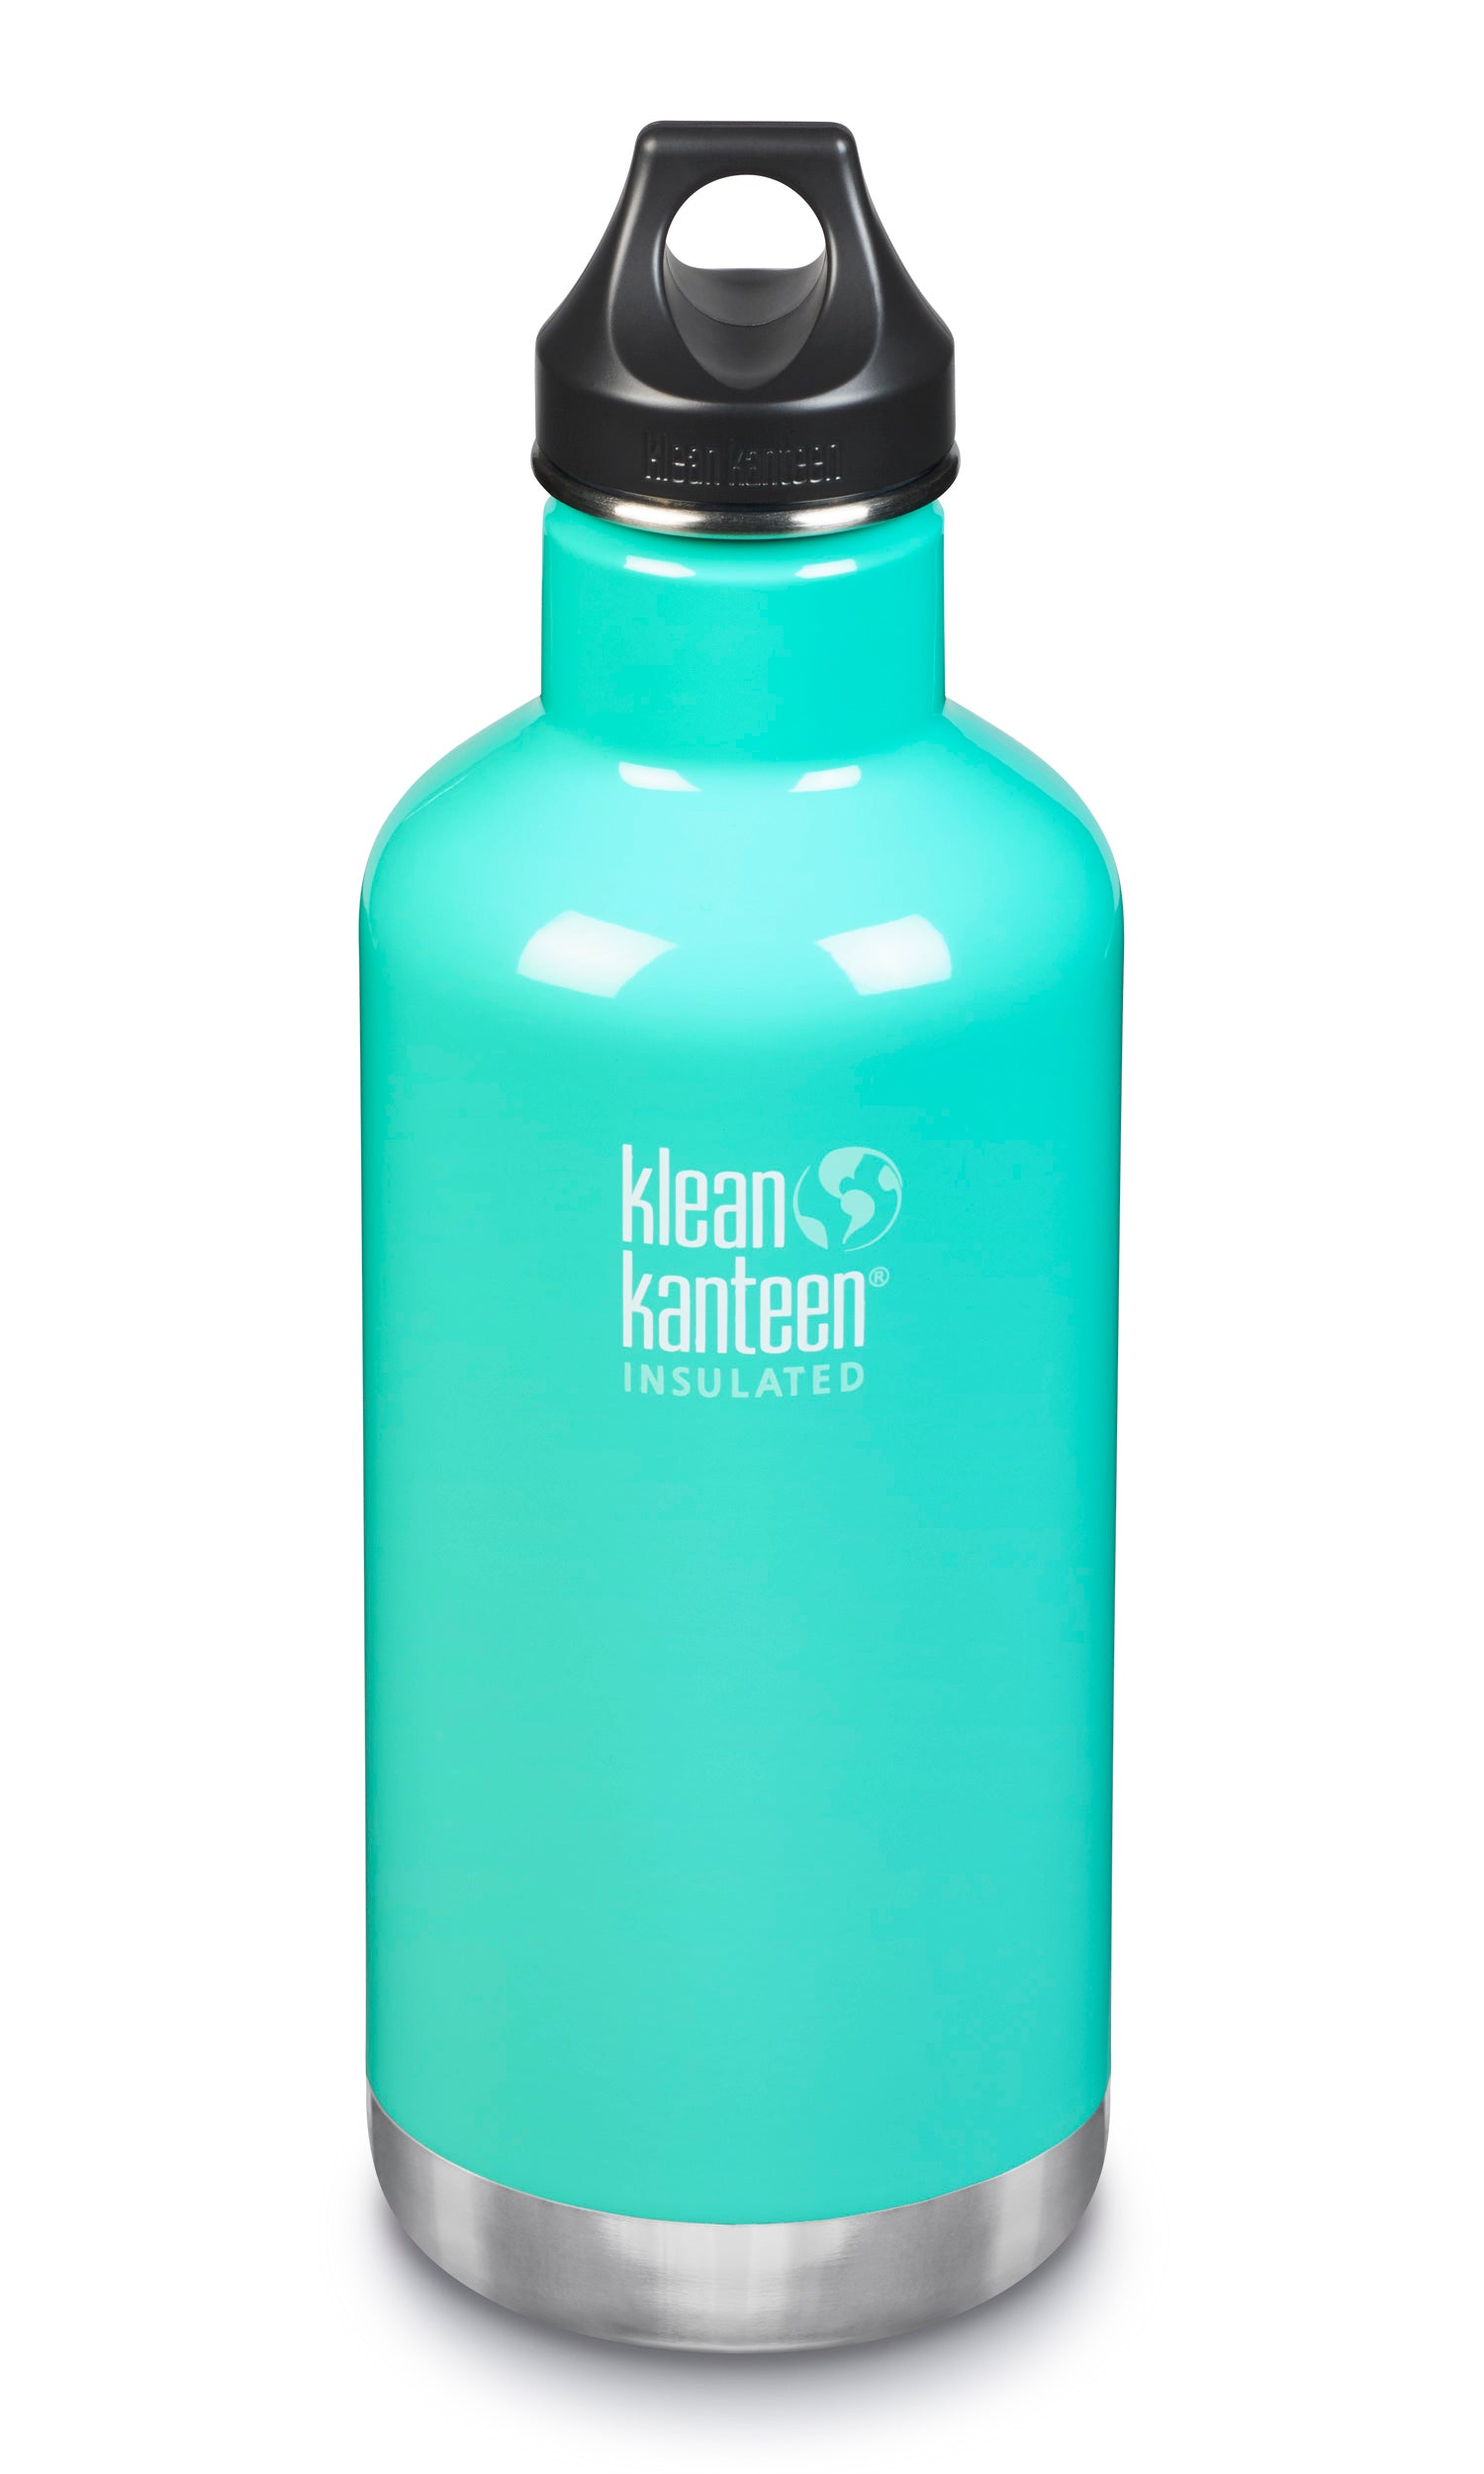 Travel Coffee and Tea Kit by Klean Kanteen